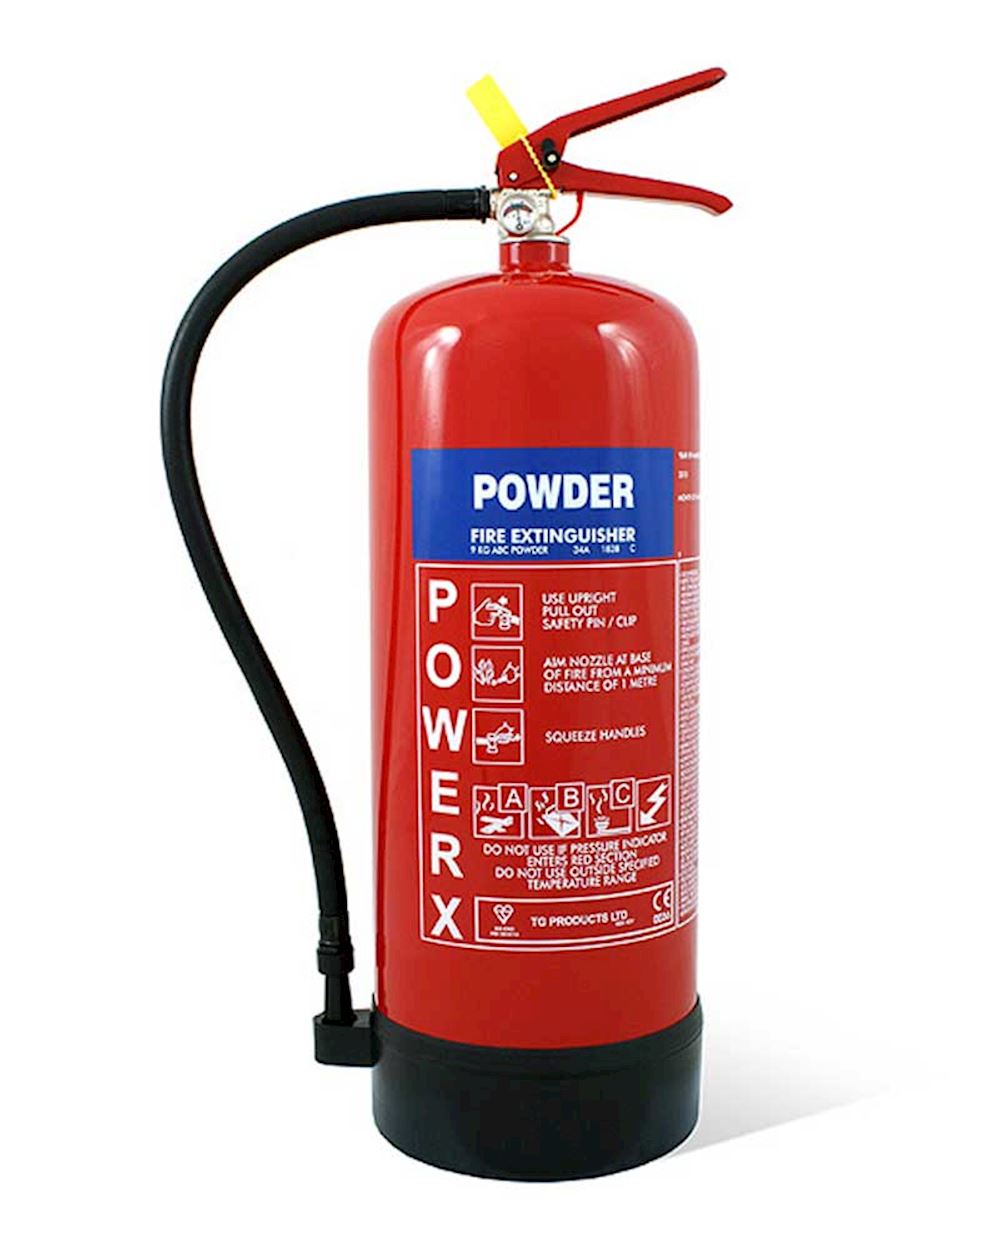 Benefits of Fire Extinguisher Testing